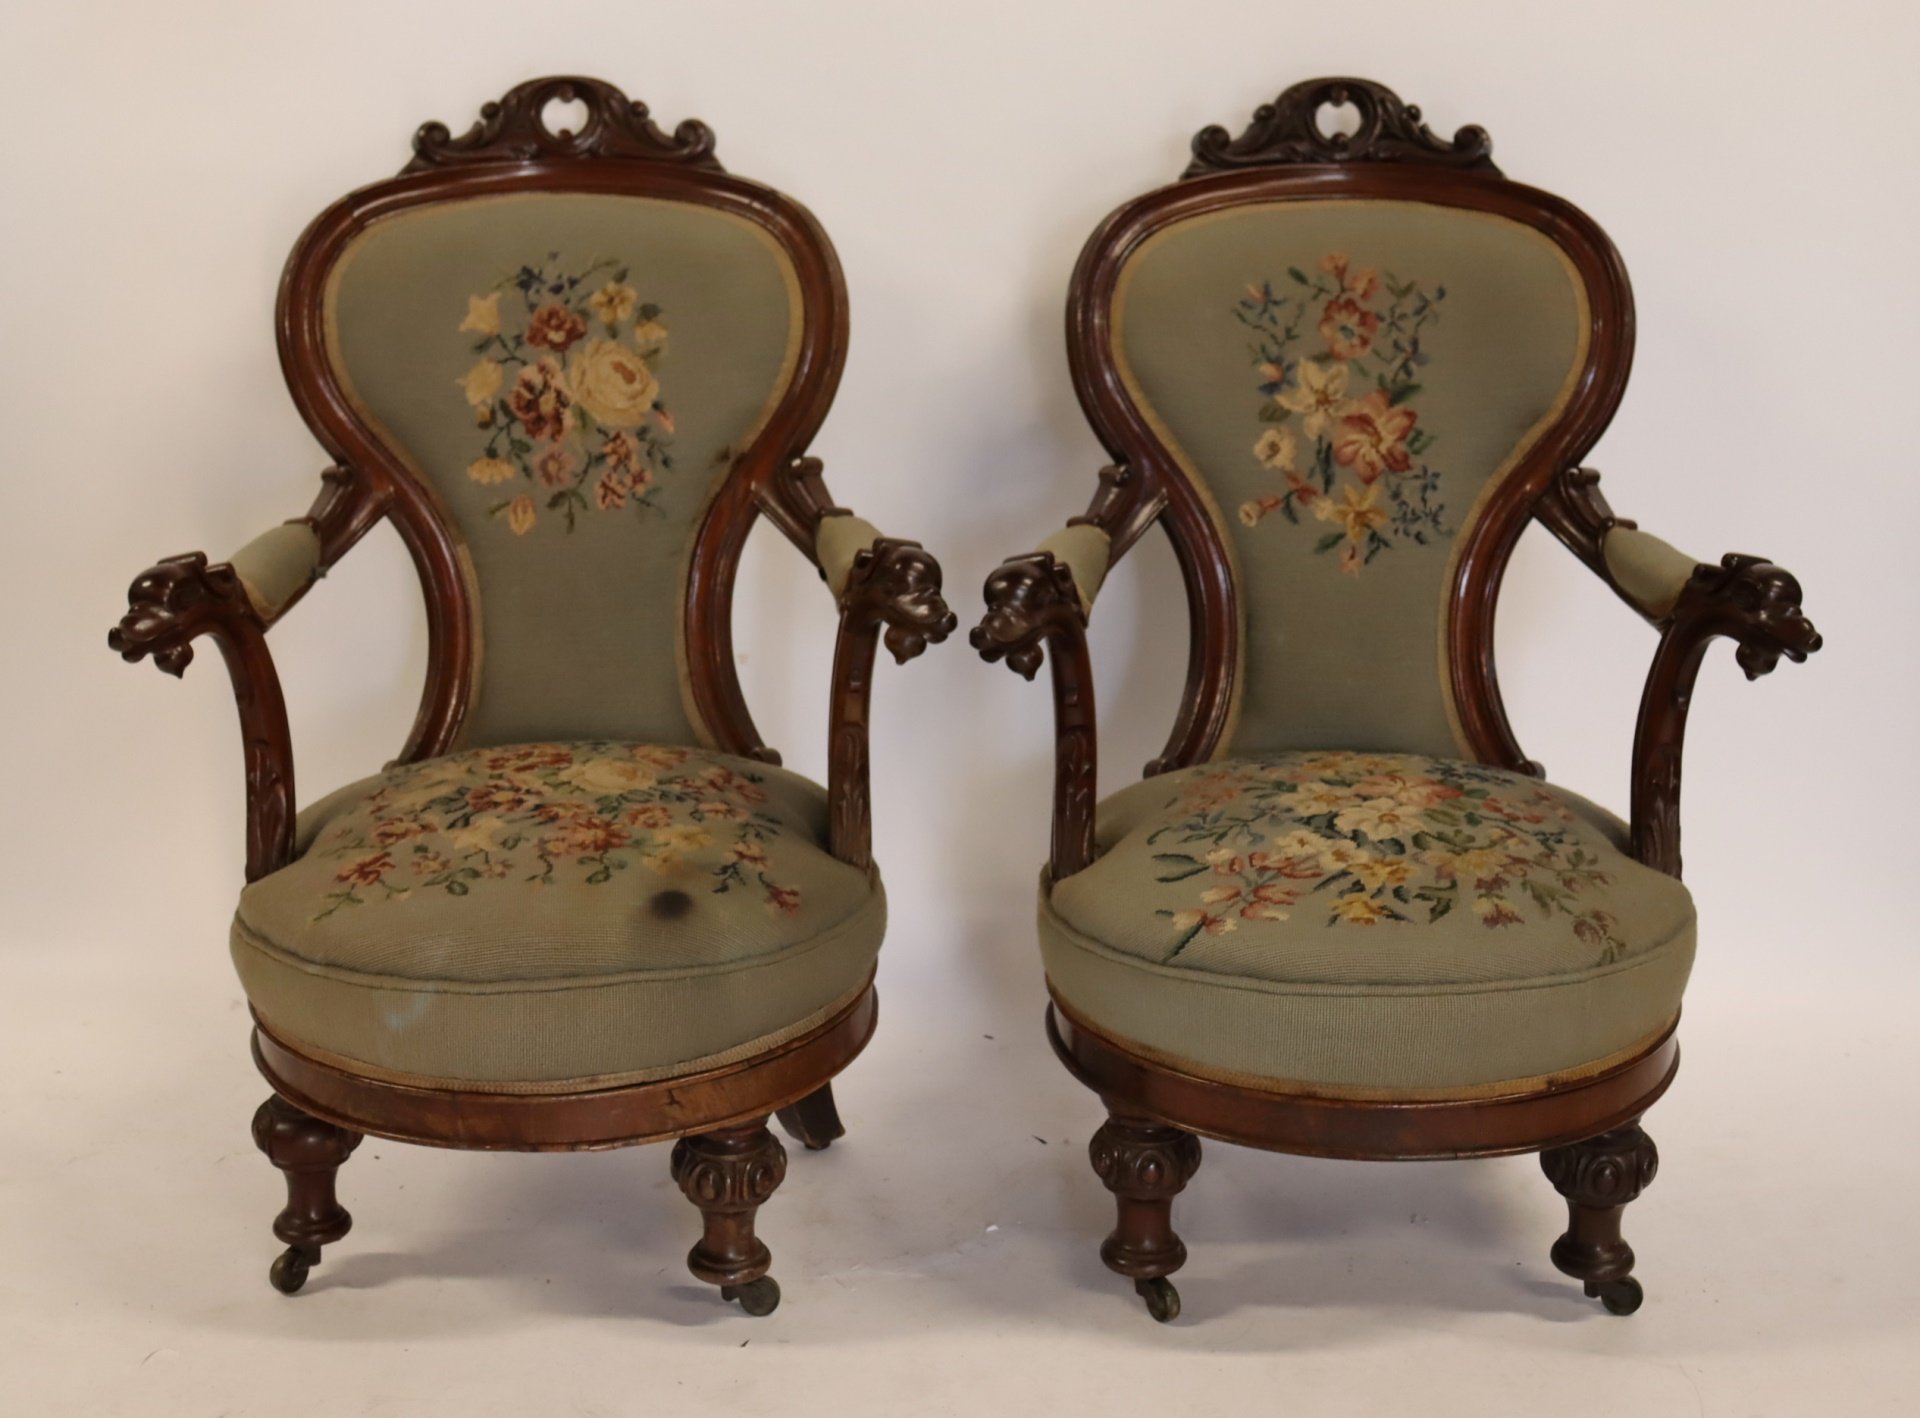 A PAIR OF VICTORIAN PARLOR CHAIRS